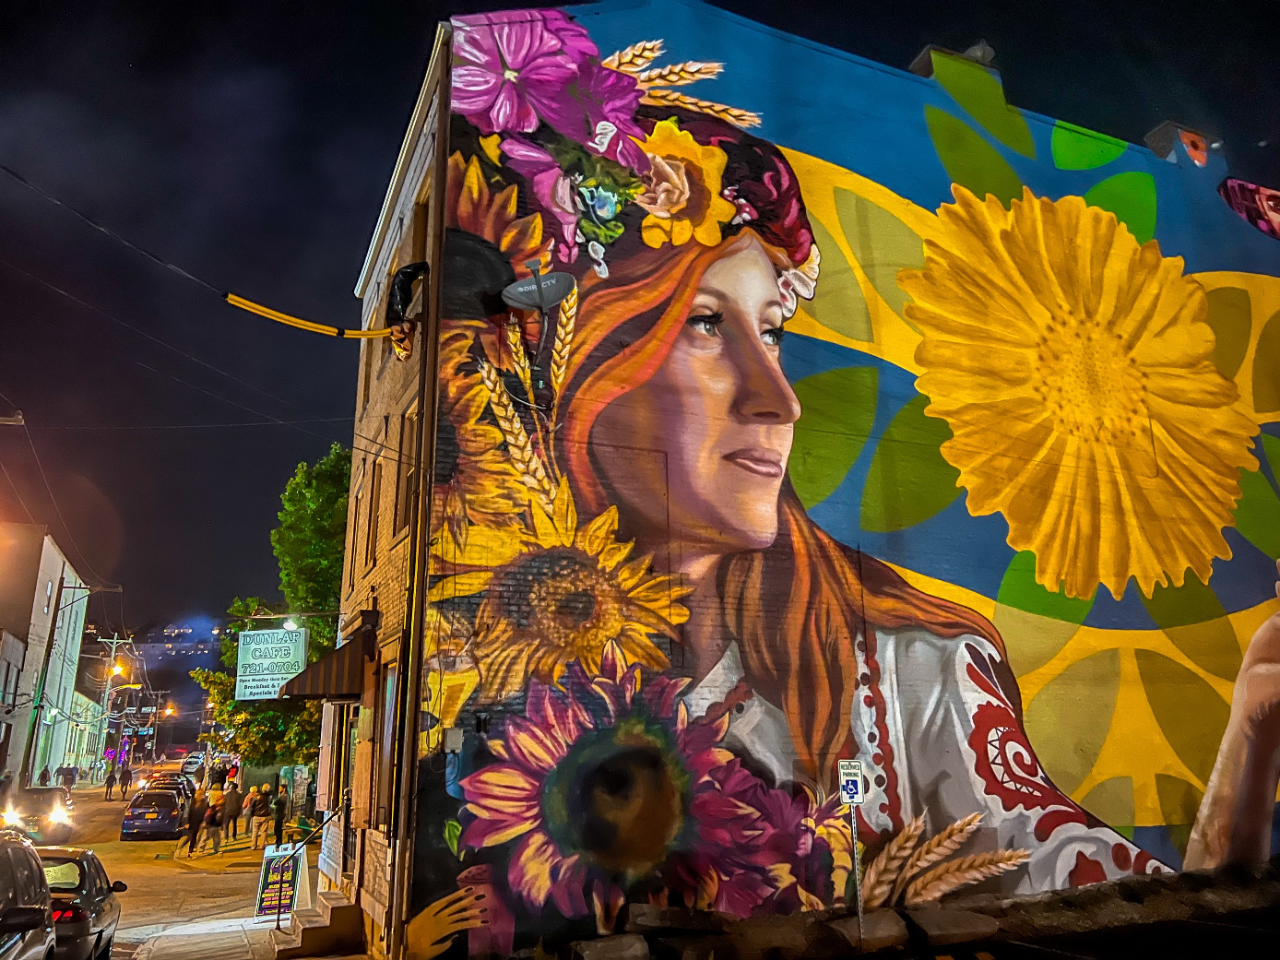 mural of a woman wearing traditional Ukrainian dress on the side of a building.